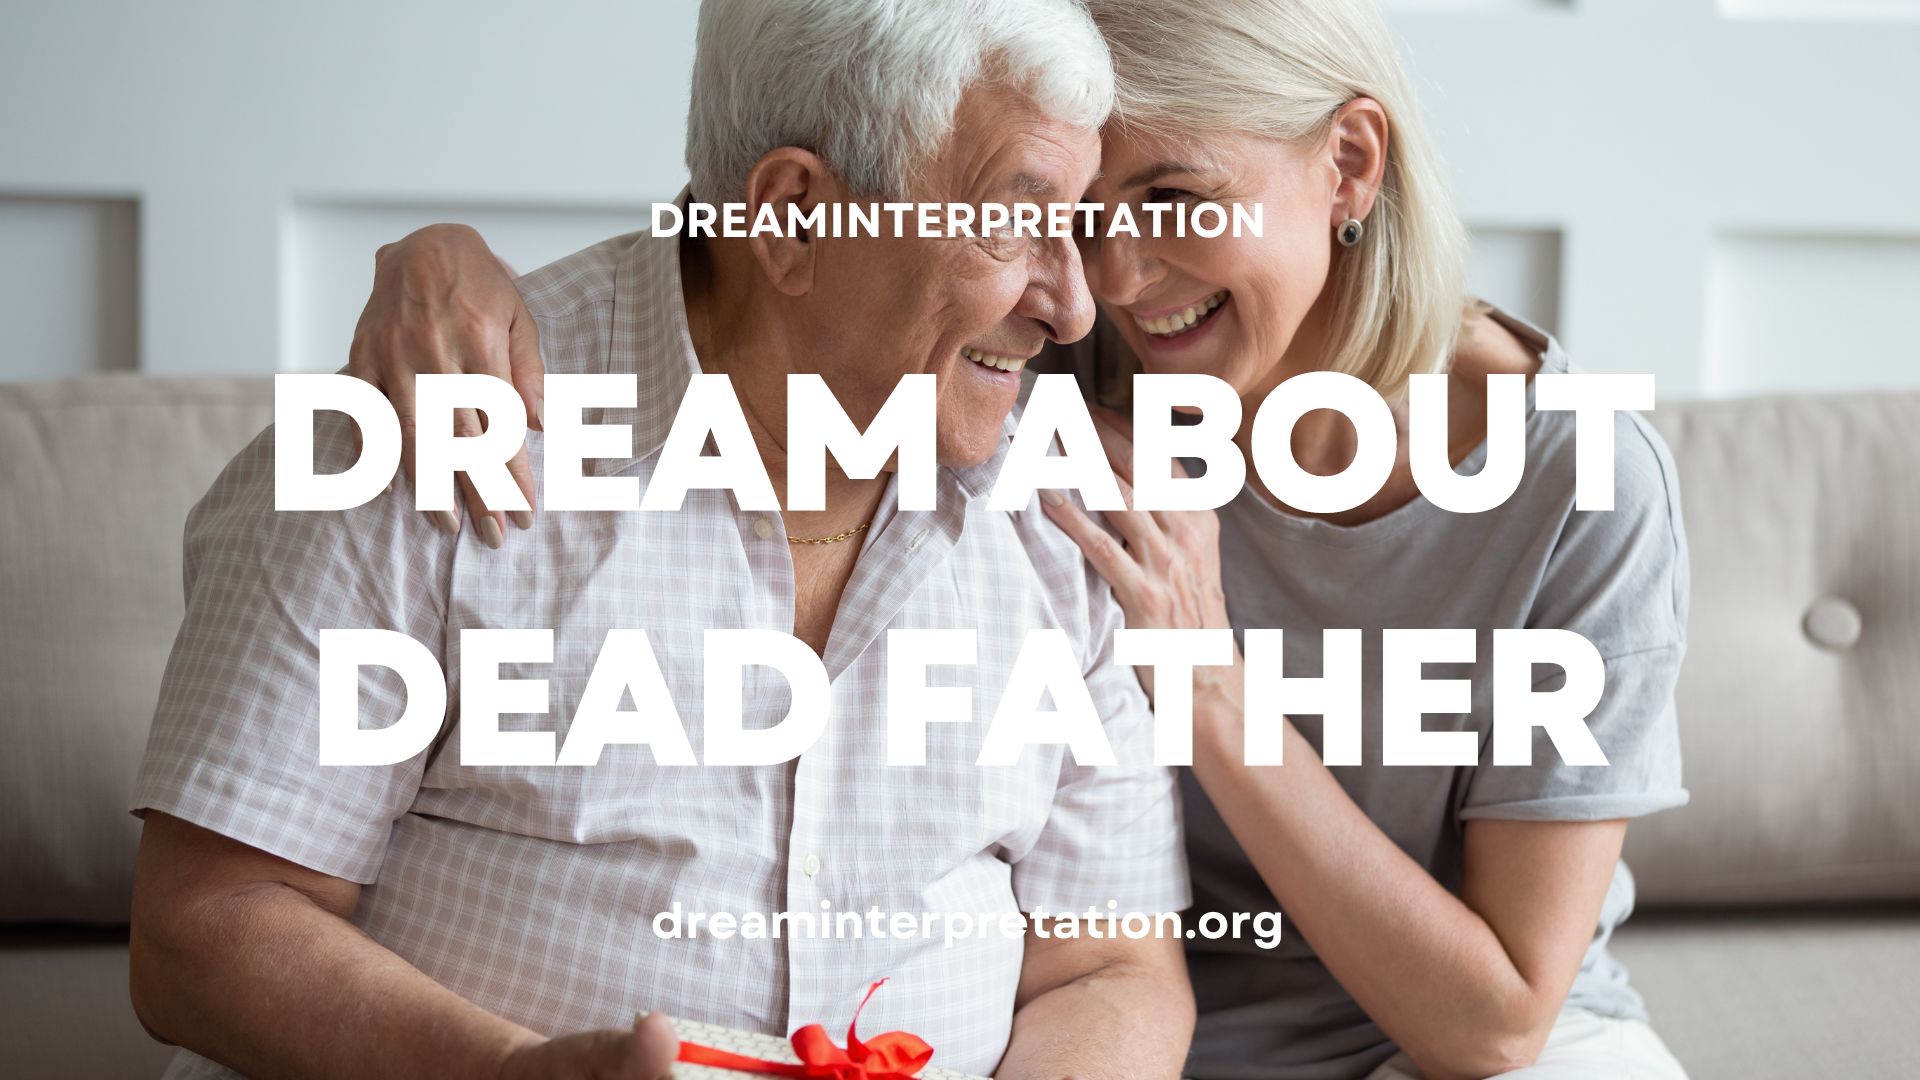 Dream About Dead Father